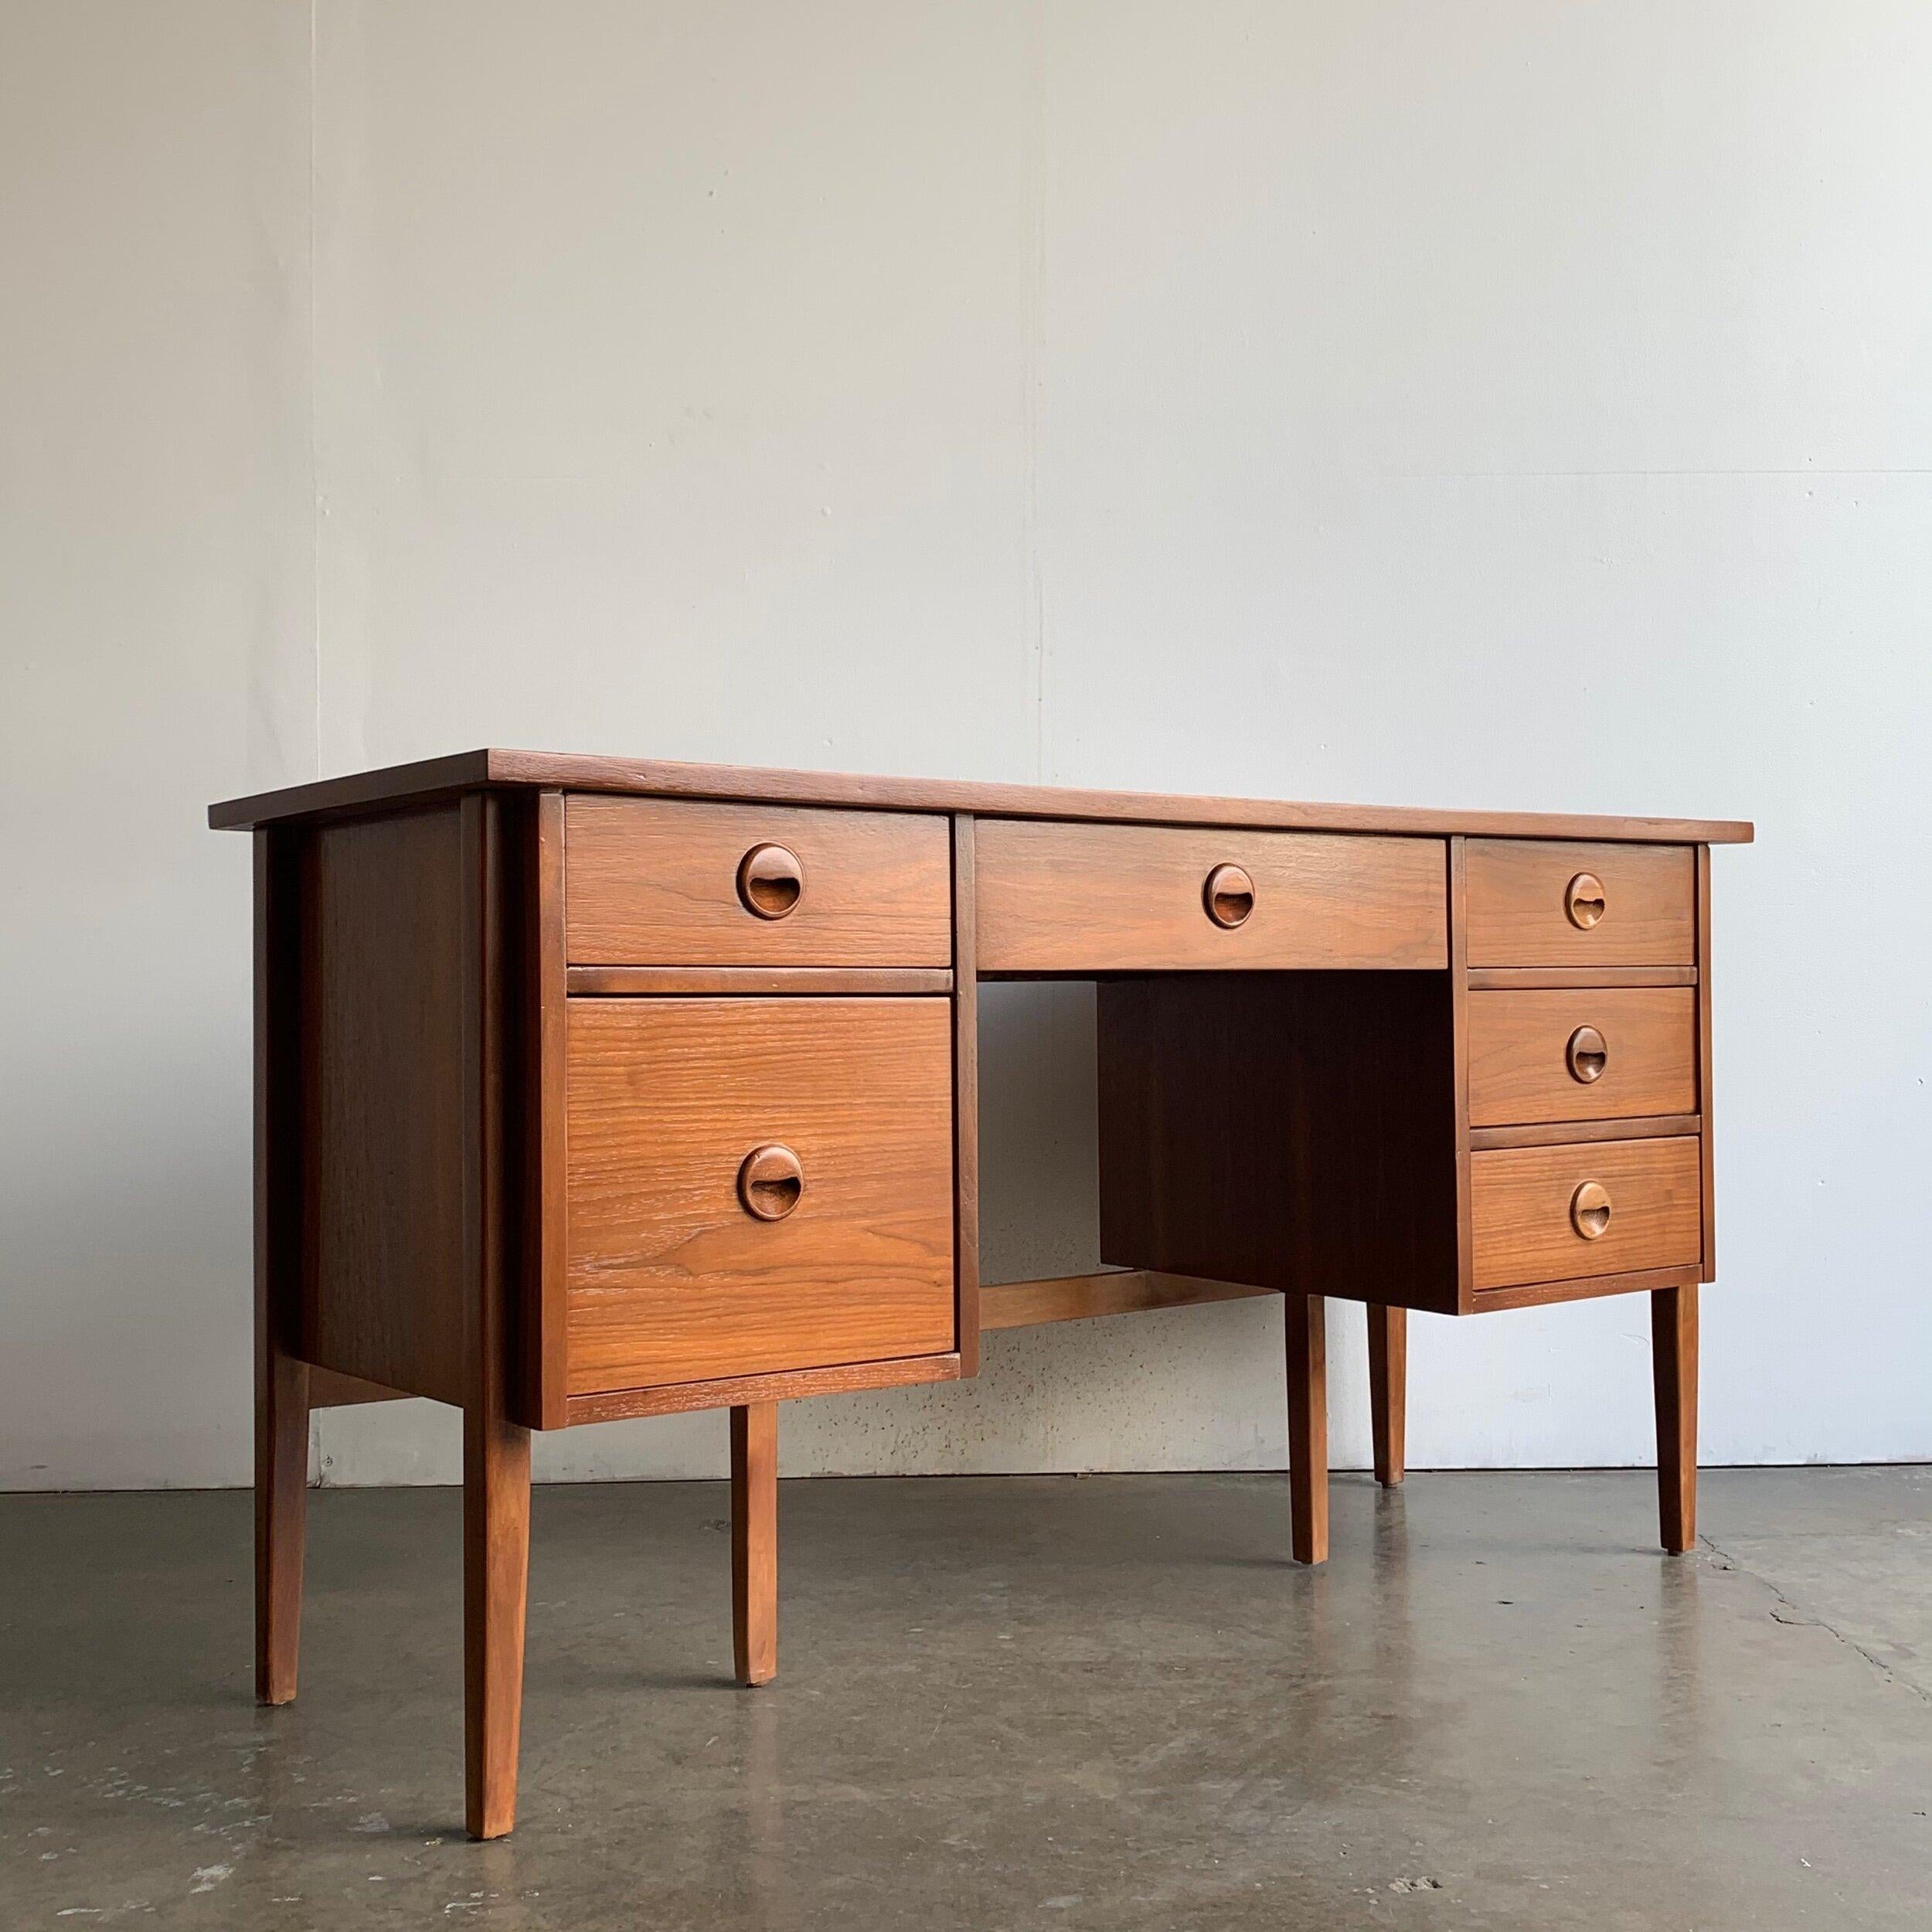 Fully restored desk circa 1960s by Stanley furniture. Item offer great storage, sculpted handles, and ample surface space. Item is finished on all sides. 

Knee clearance 23.75.